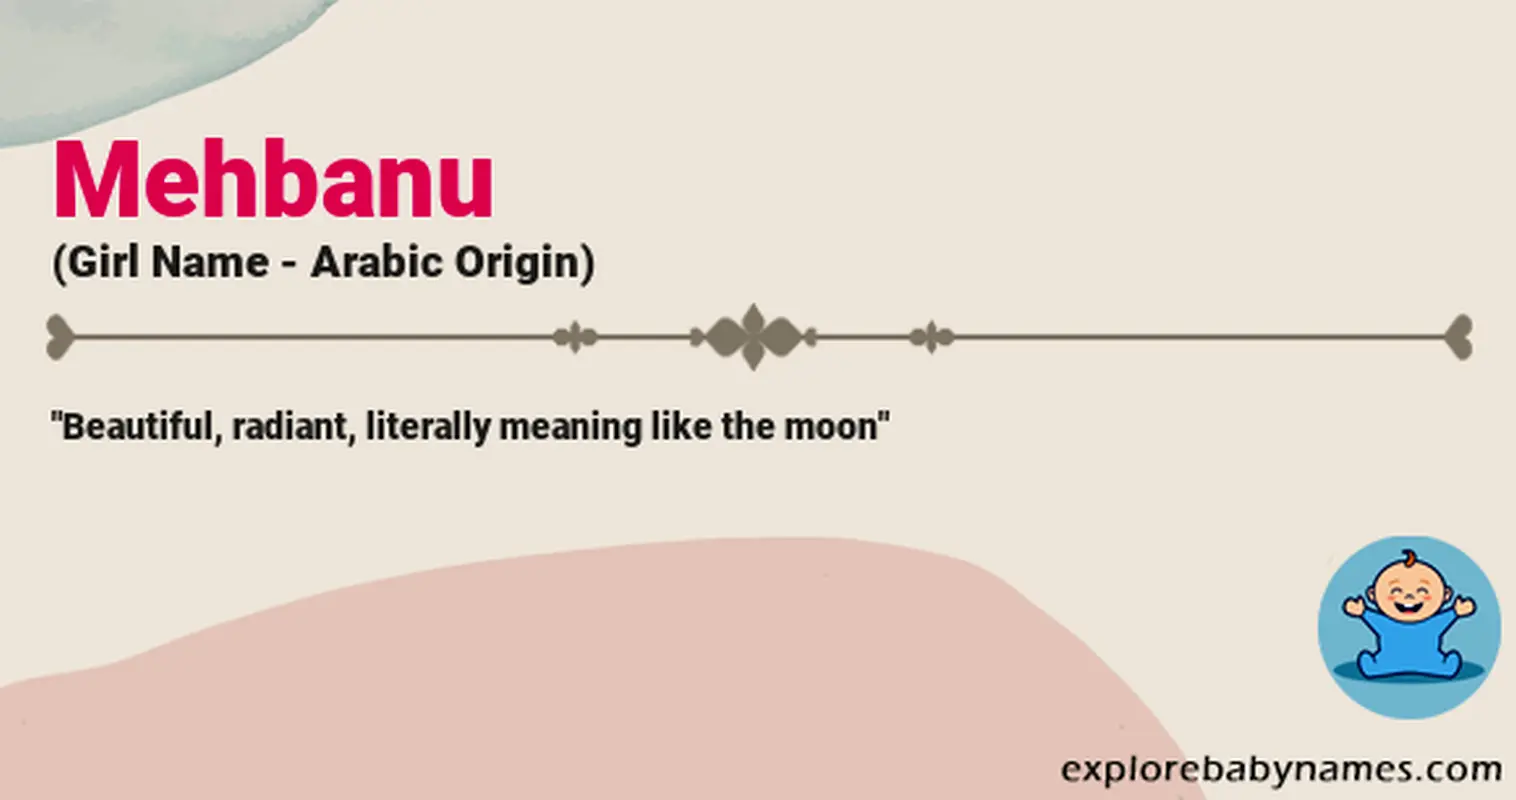 Meaning of Mehbanu